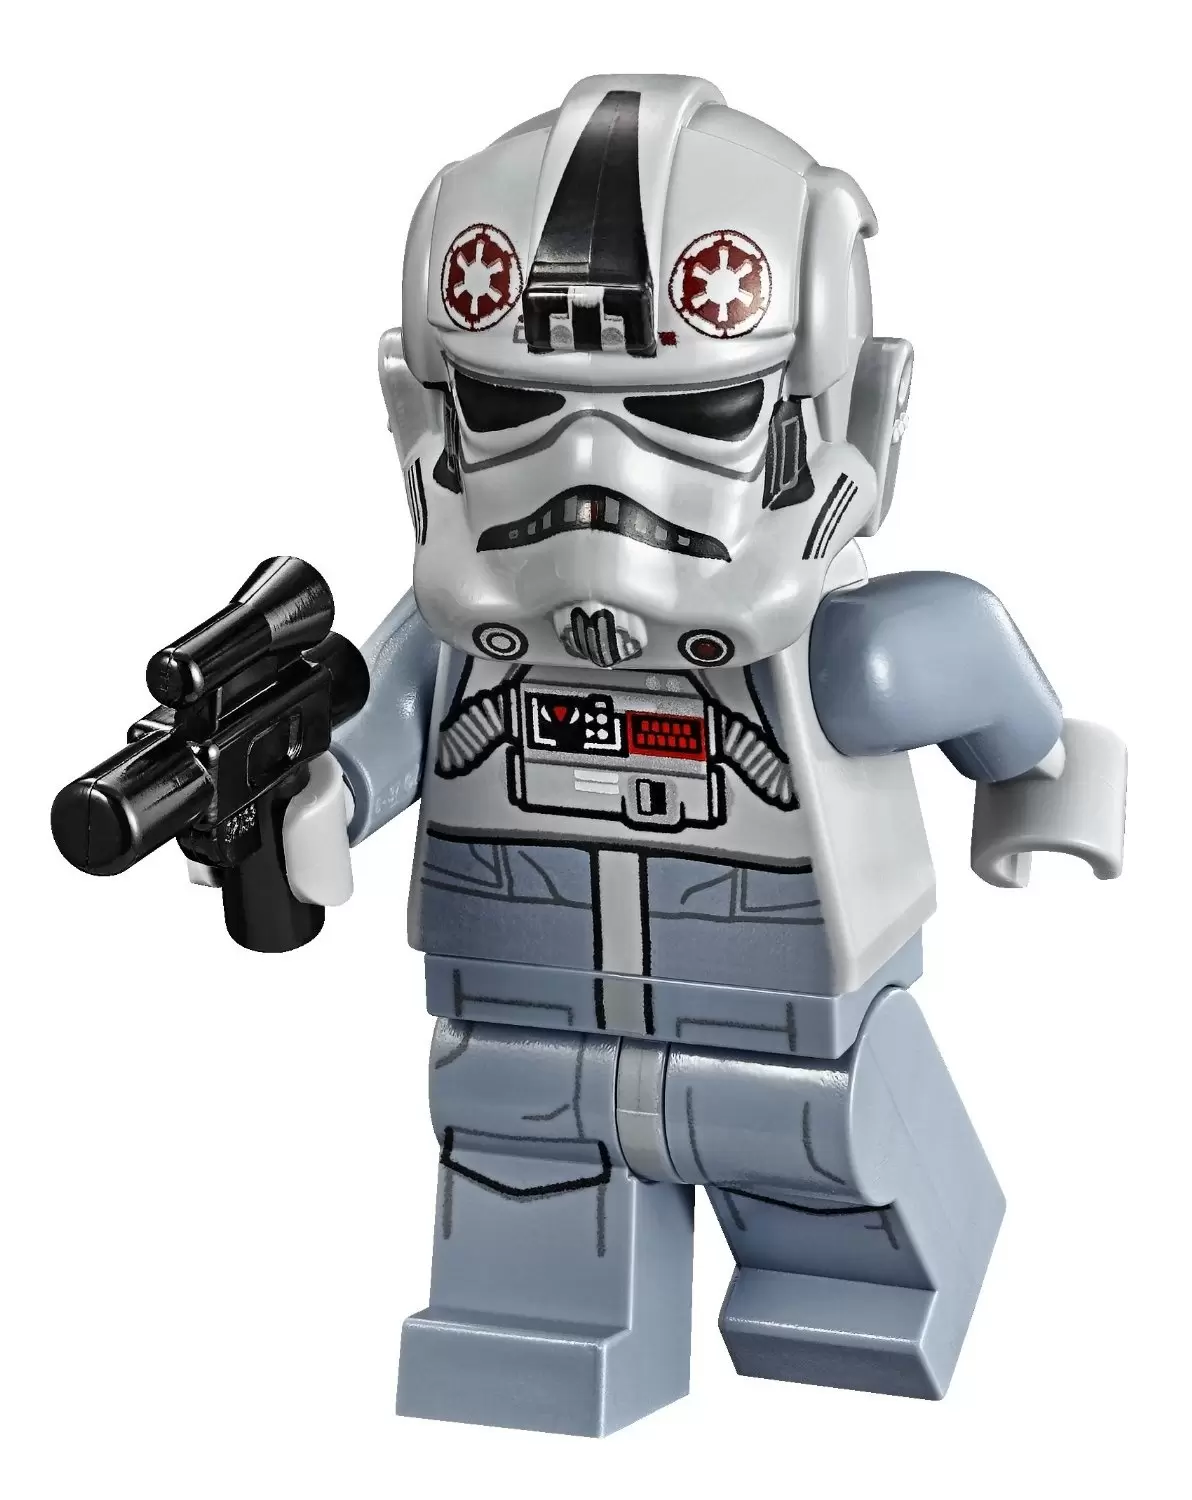 Minifigurines LEGO Star Wars - AT-AT Driver - Dark Red Imperial Logo, Grimacing